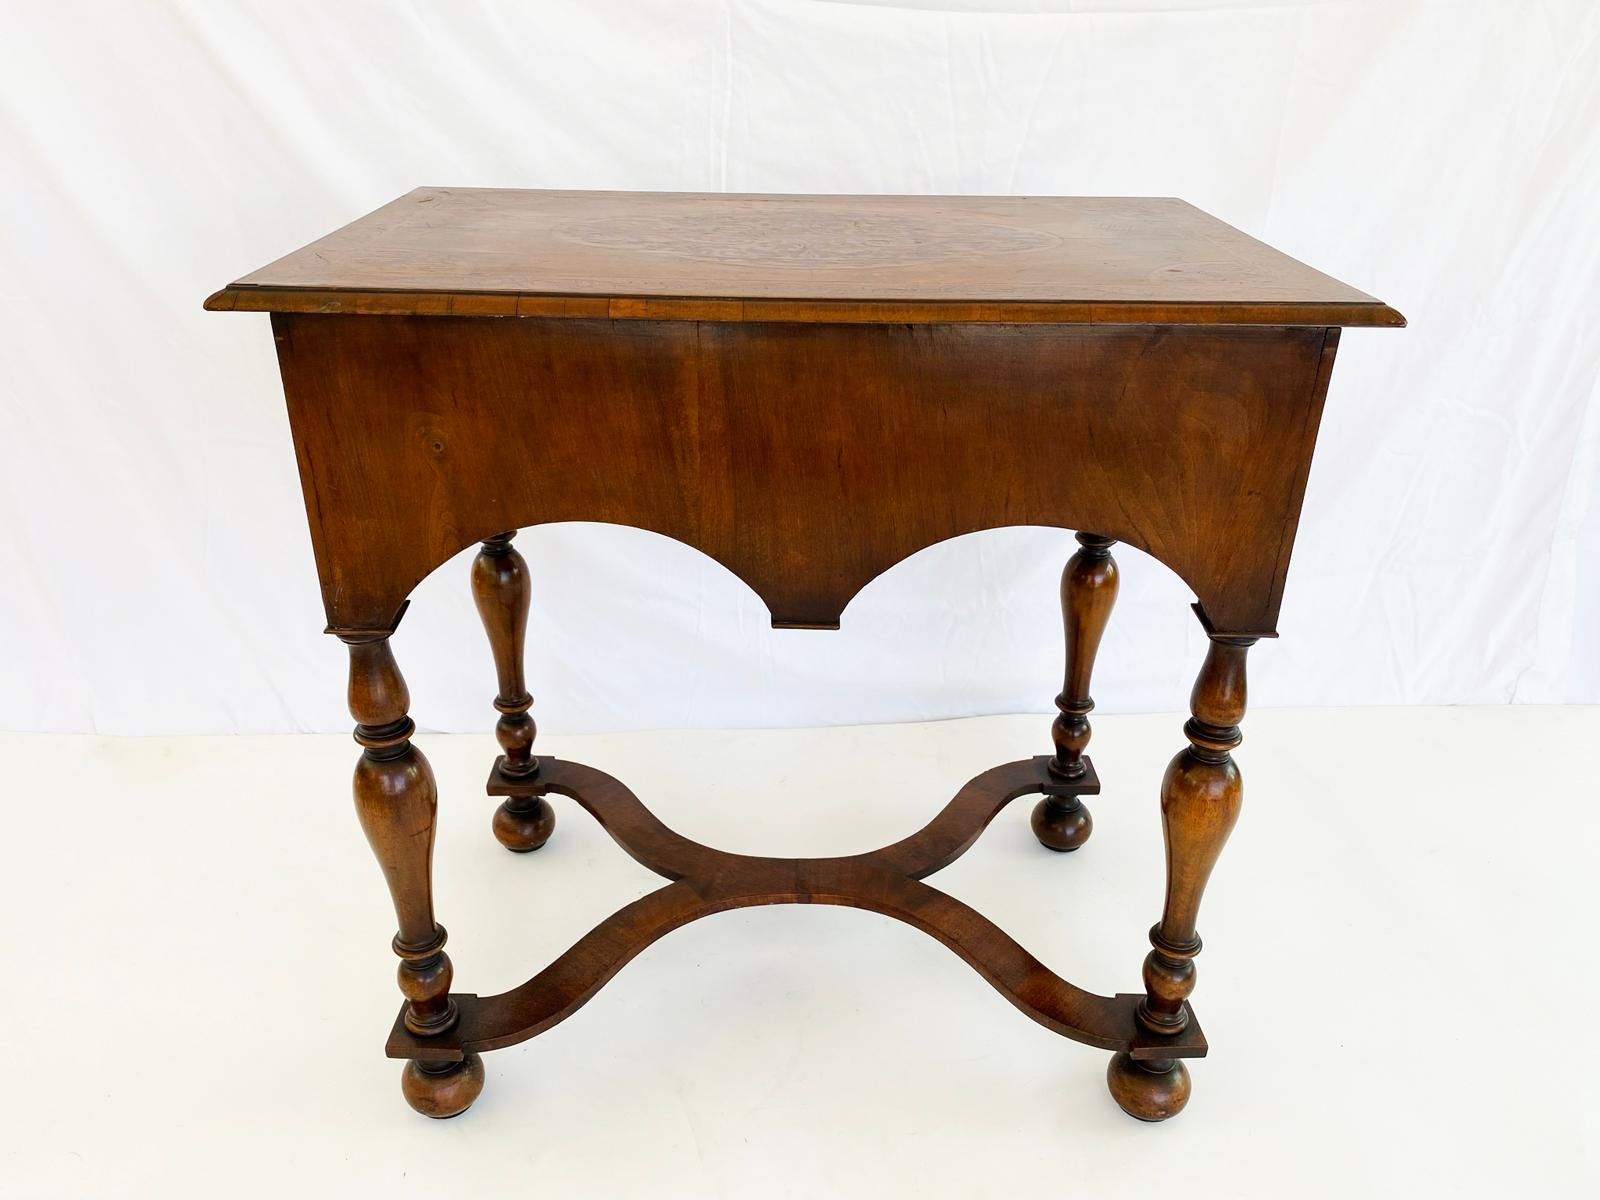 Mid-19th Century English Walnut Lowboy with Seaweed Marquetry Inlay and Cross Banded Top